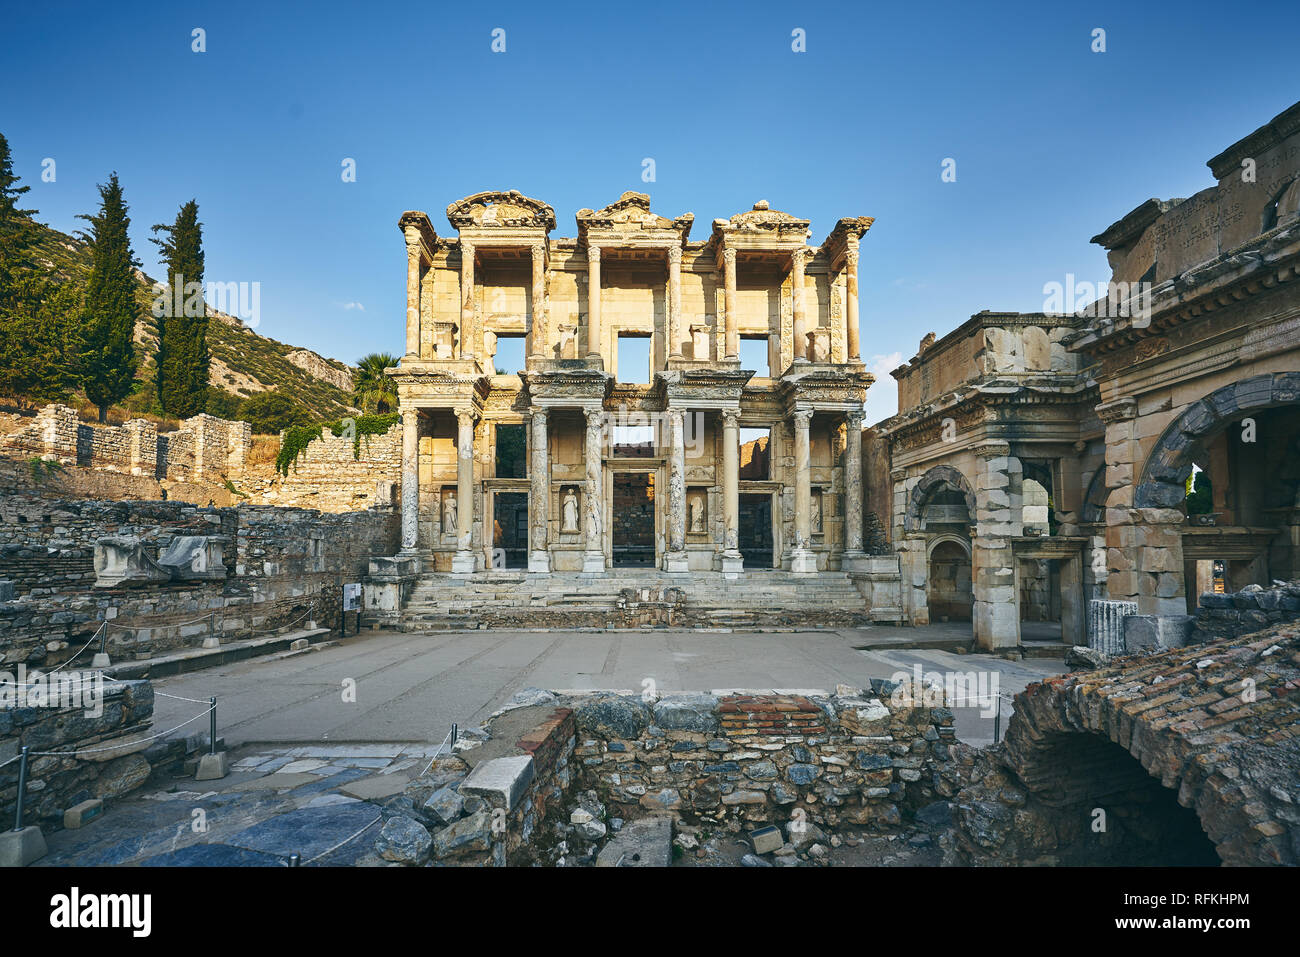 Library of Celsus of Ephesus / Efes, Turkey. Ephesus was an ancient Greek city on the coast of Ionia. Now it is located in Selcuk, Izmir, Turkey Stock Photo